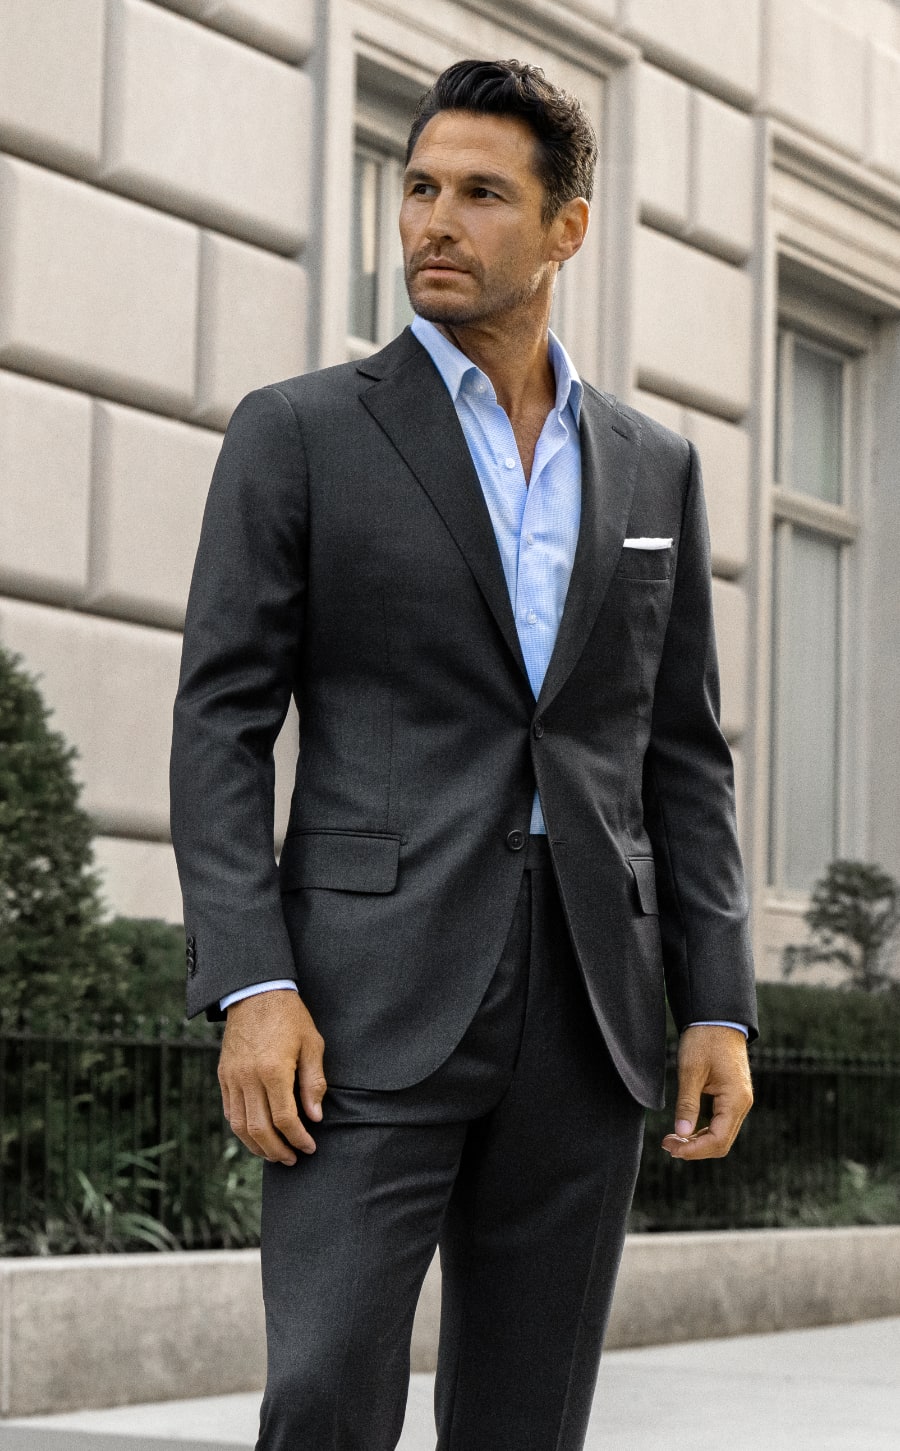 Men’s Custom Suits - Made-to-Measure Suiting - Proper Cloth